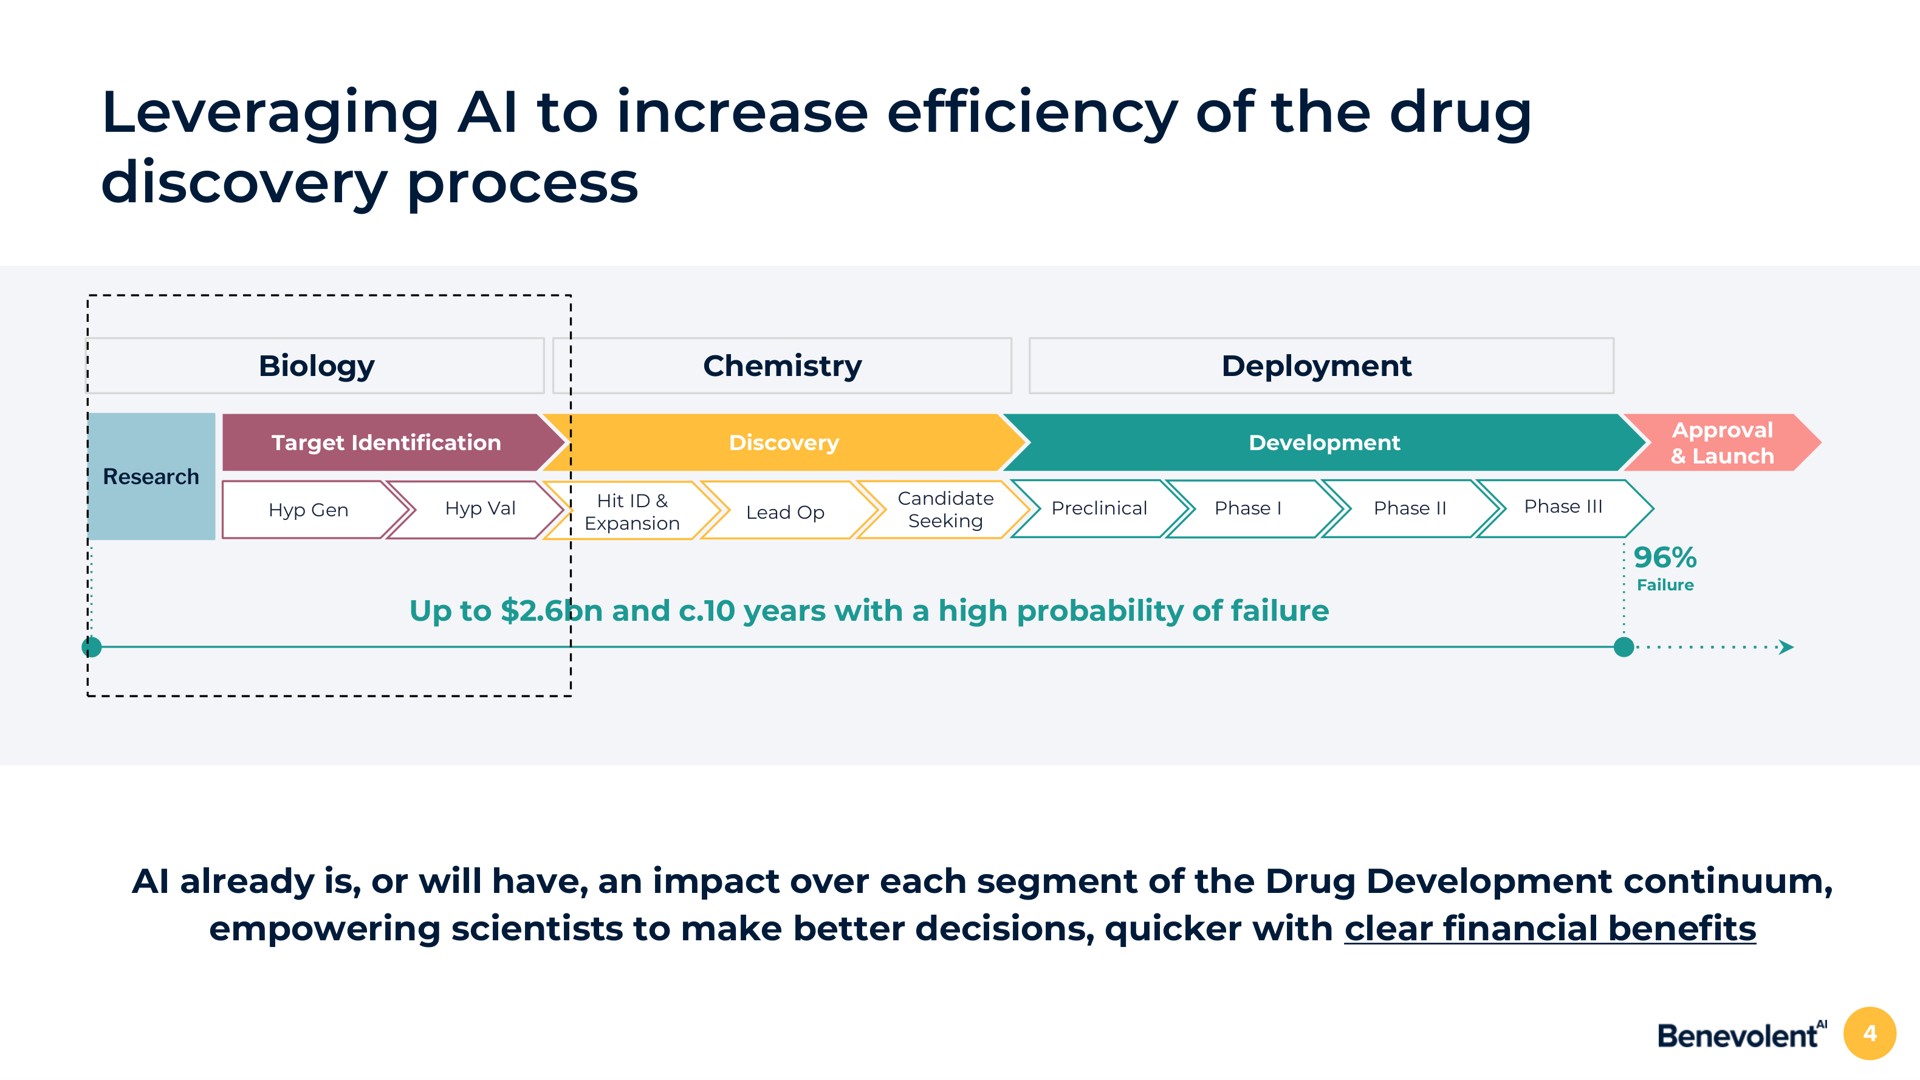 leveraging to increase efficiency of the drug discovery process | BenevolentAI